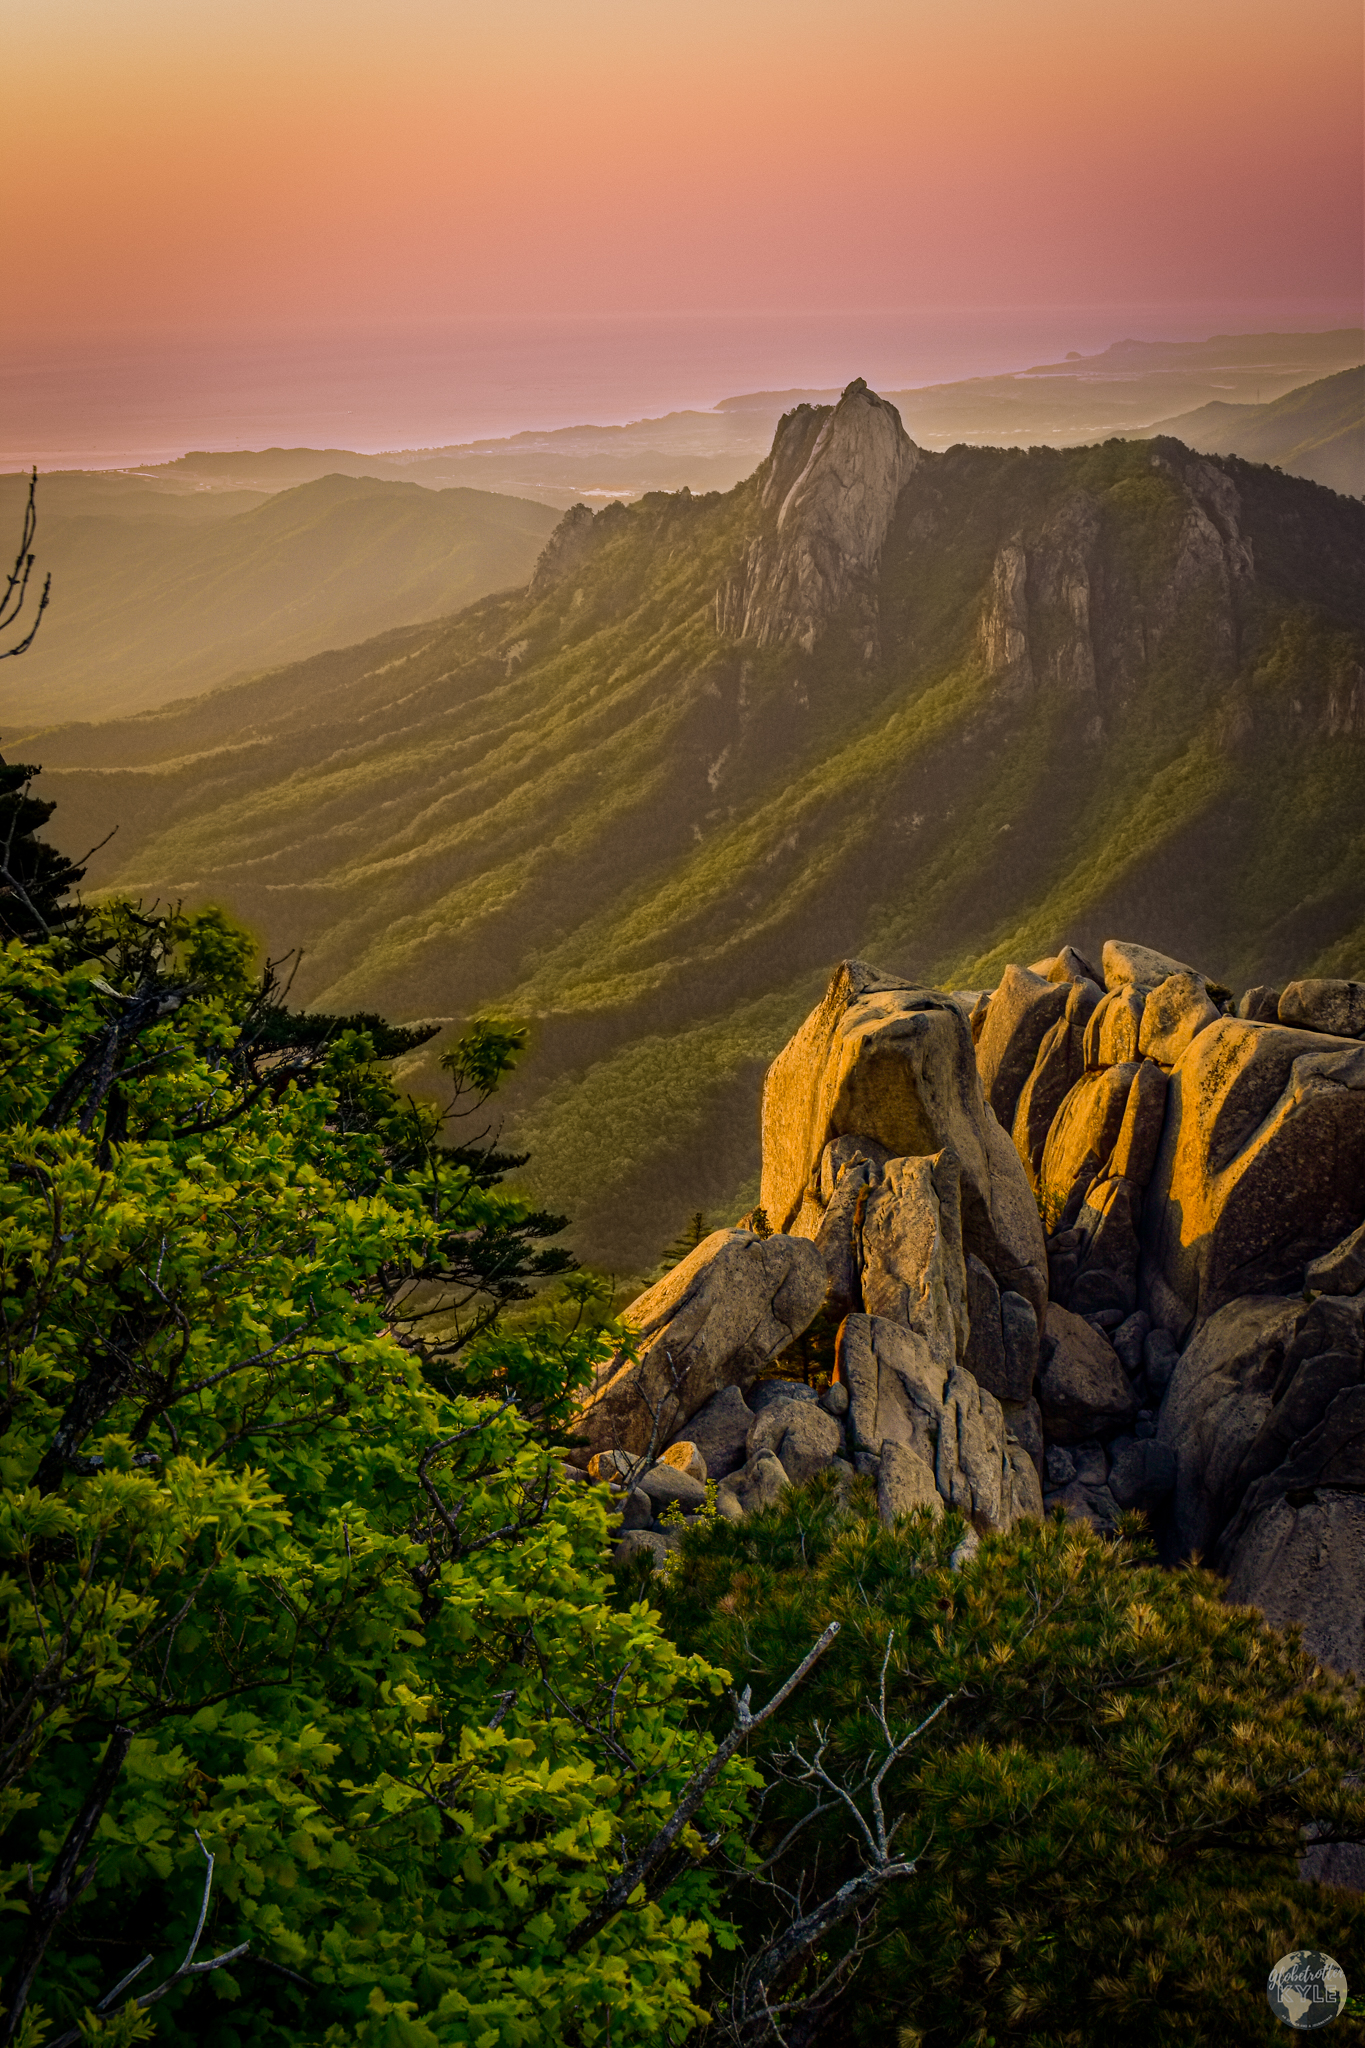 A redish glow from the sunrise forms over the Tabaek mountains at Soraksan National Park, South Korea with the East Sea in the distance. Sunrise from Soraksan National Park, South Korea